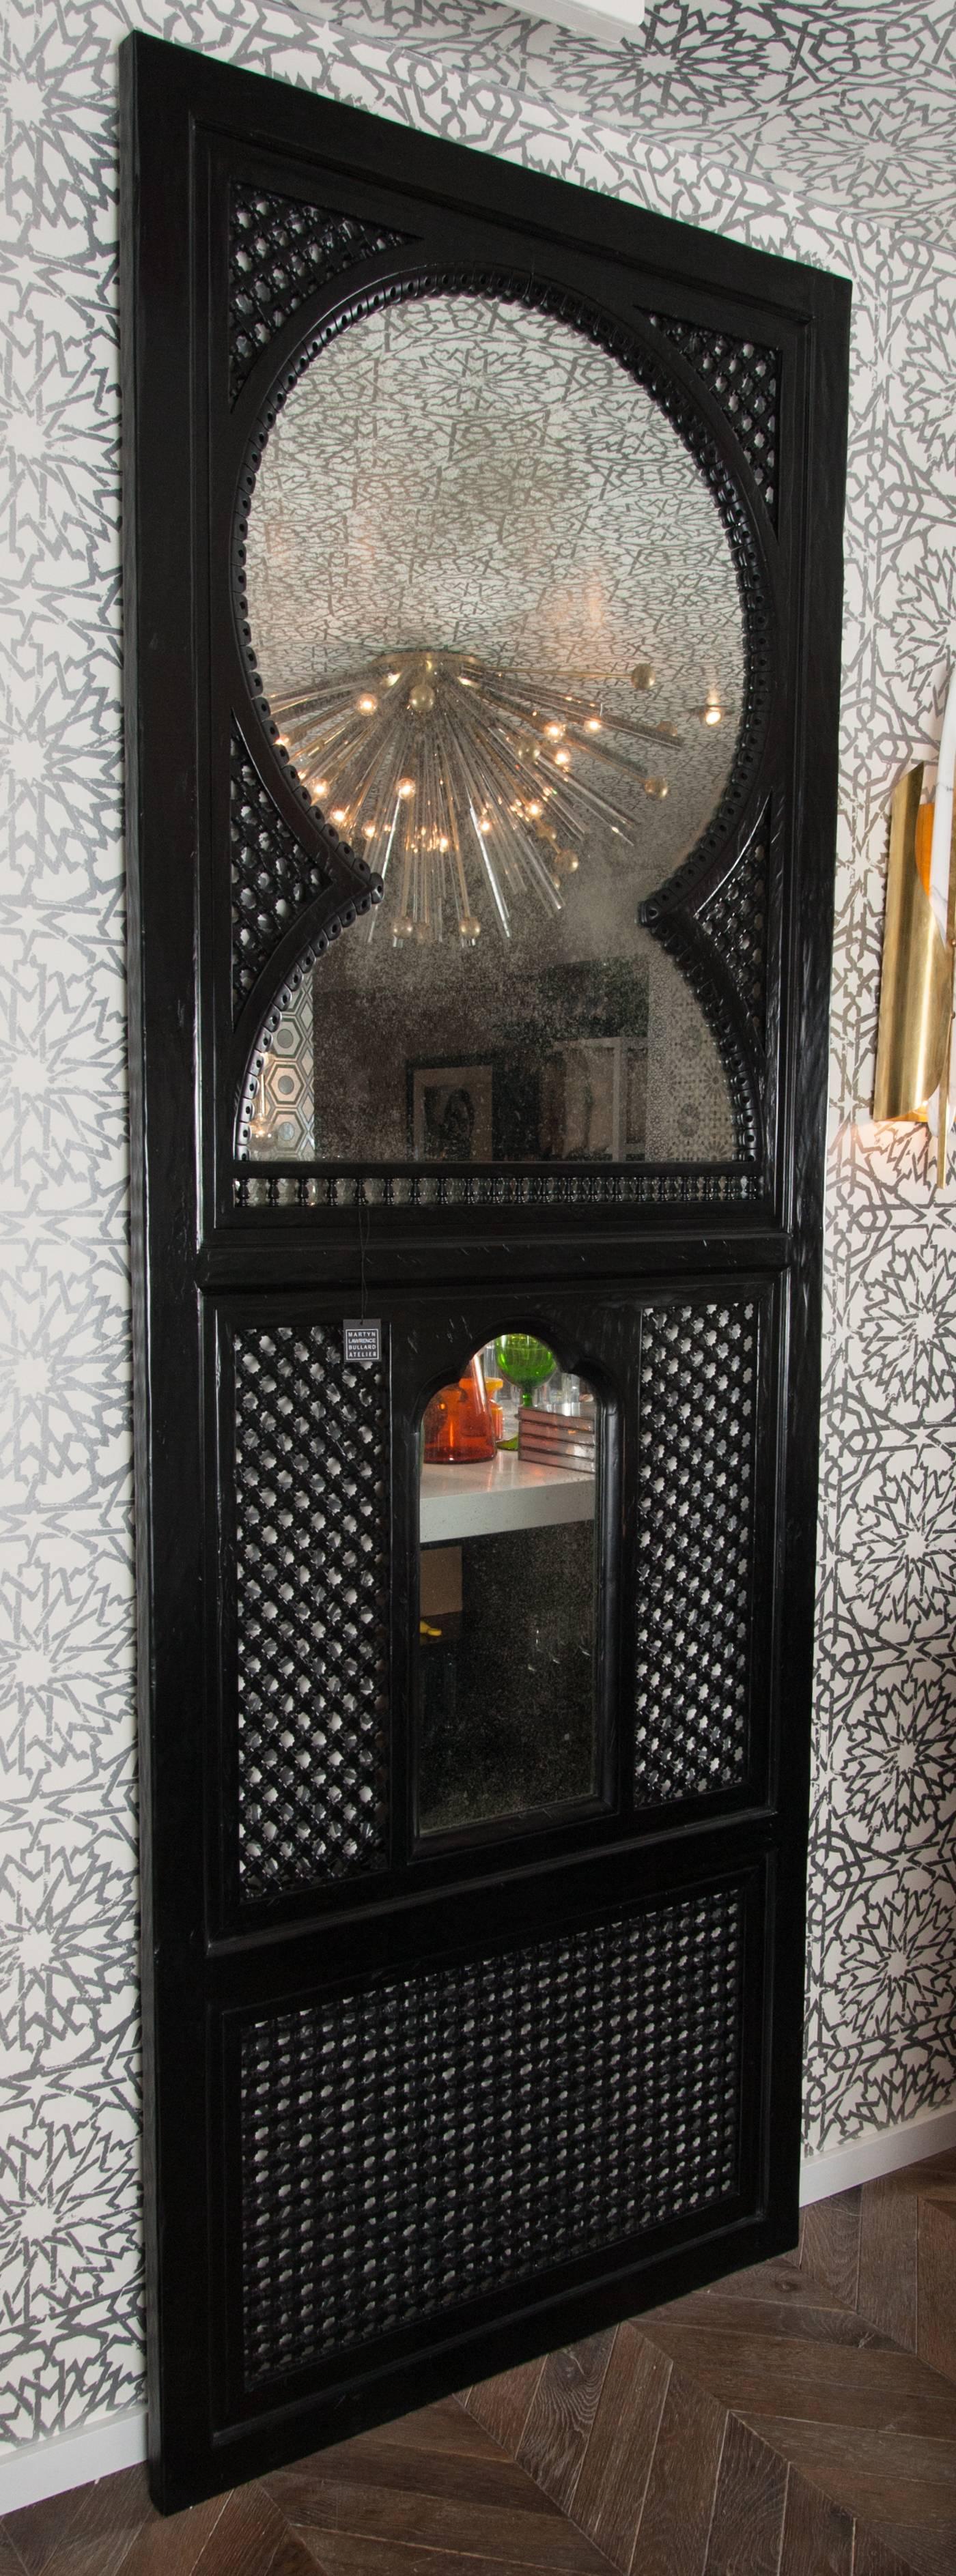 Martyn Lawrence Bullard's custom Agadir screen; taken from the window frames that line the walls of the King's palace.
Black lacquered alder wood with distressed mirror.